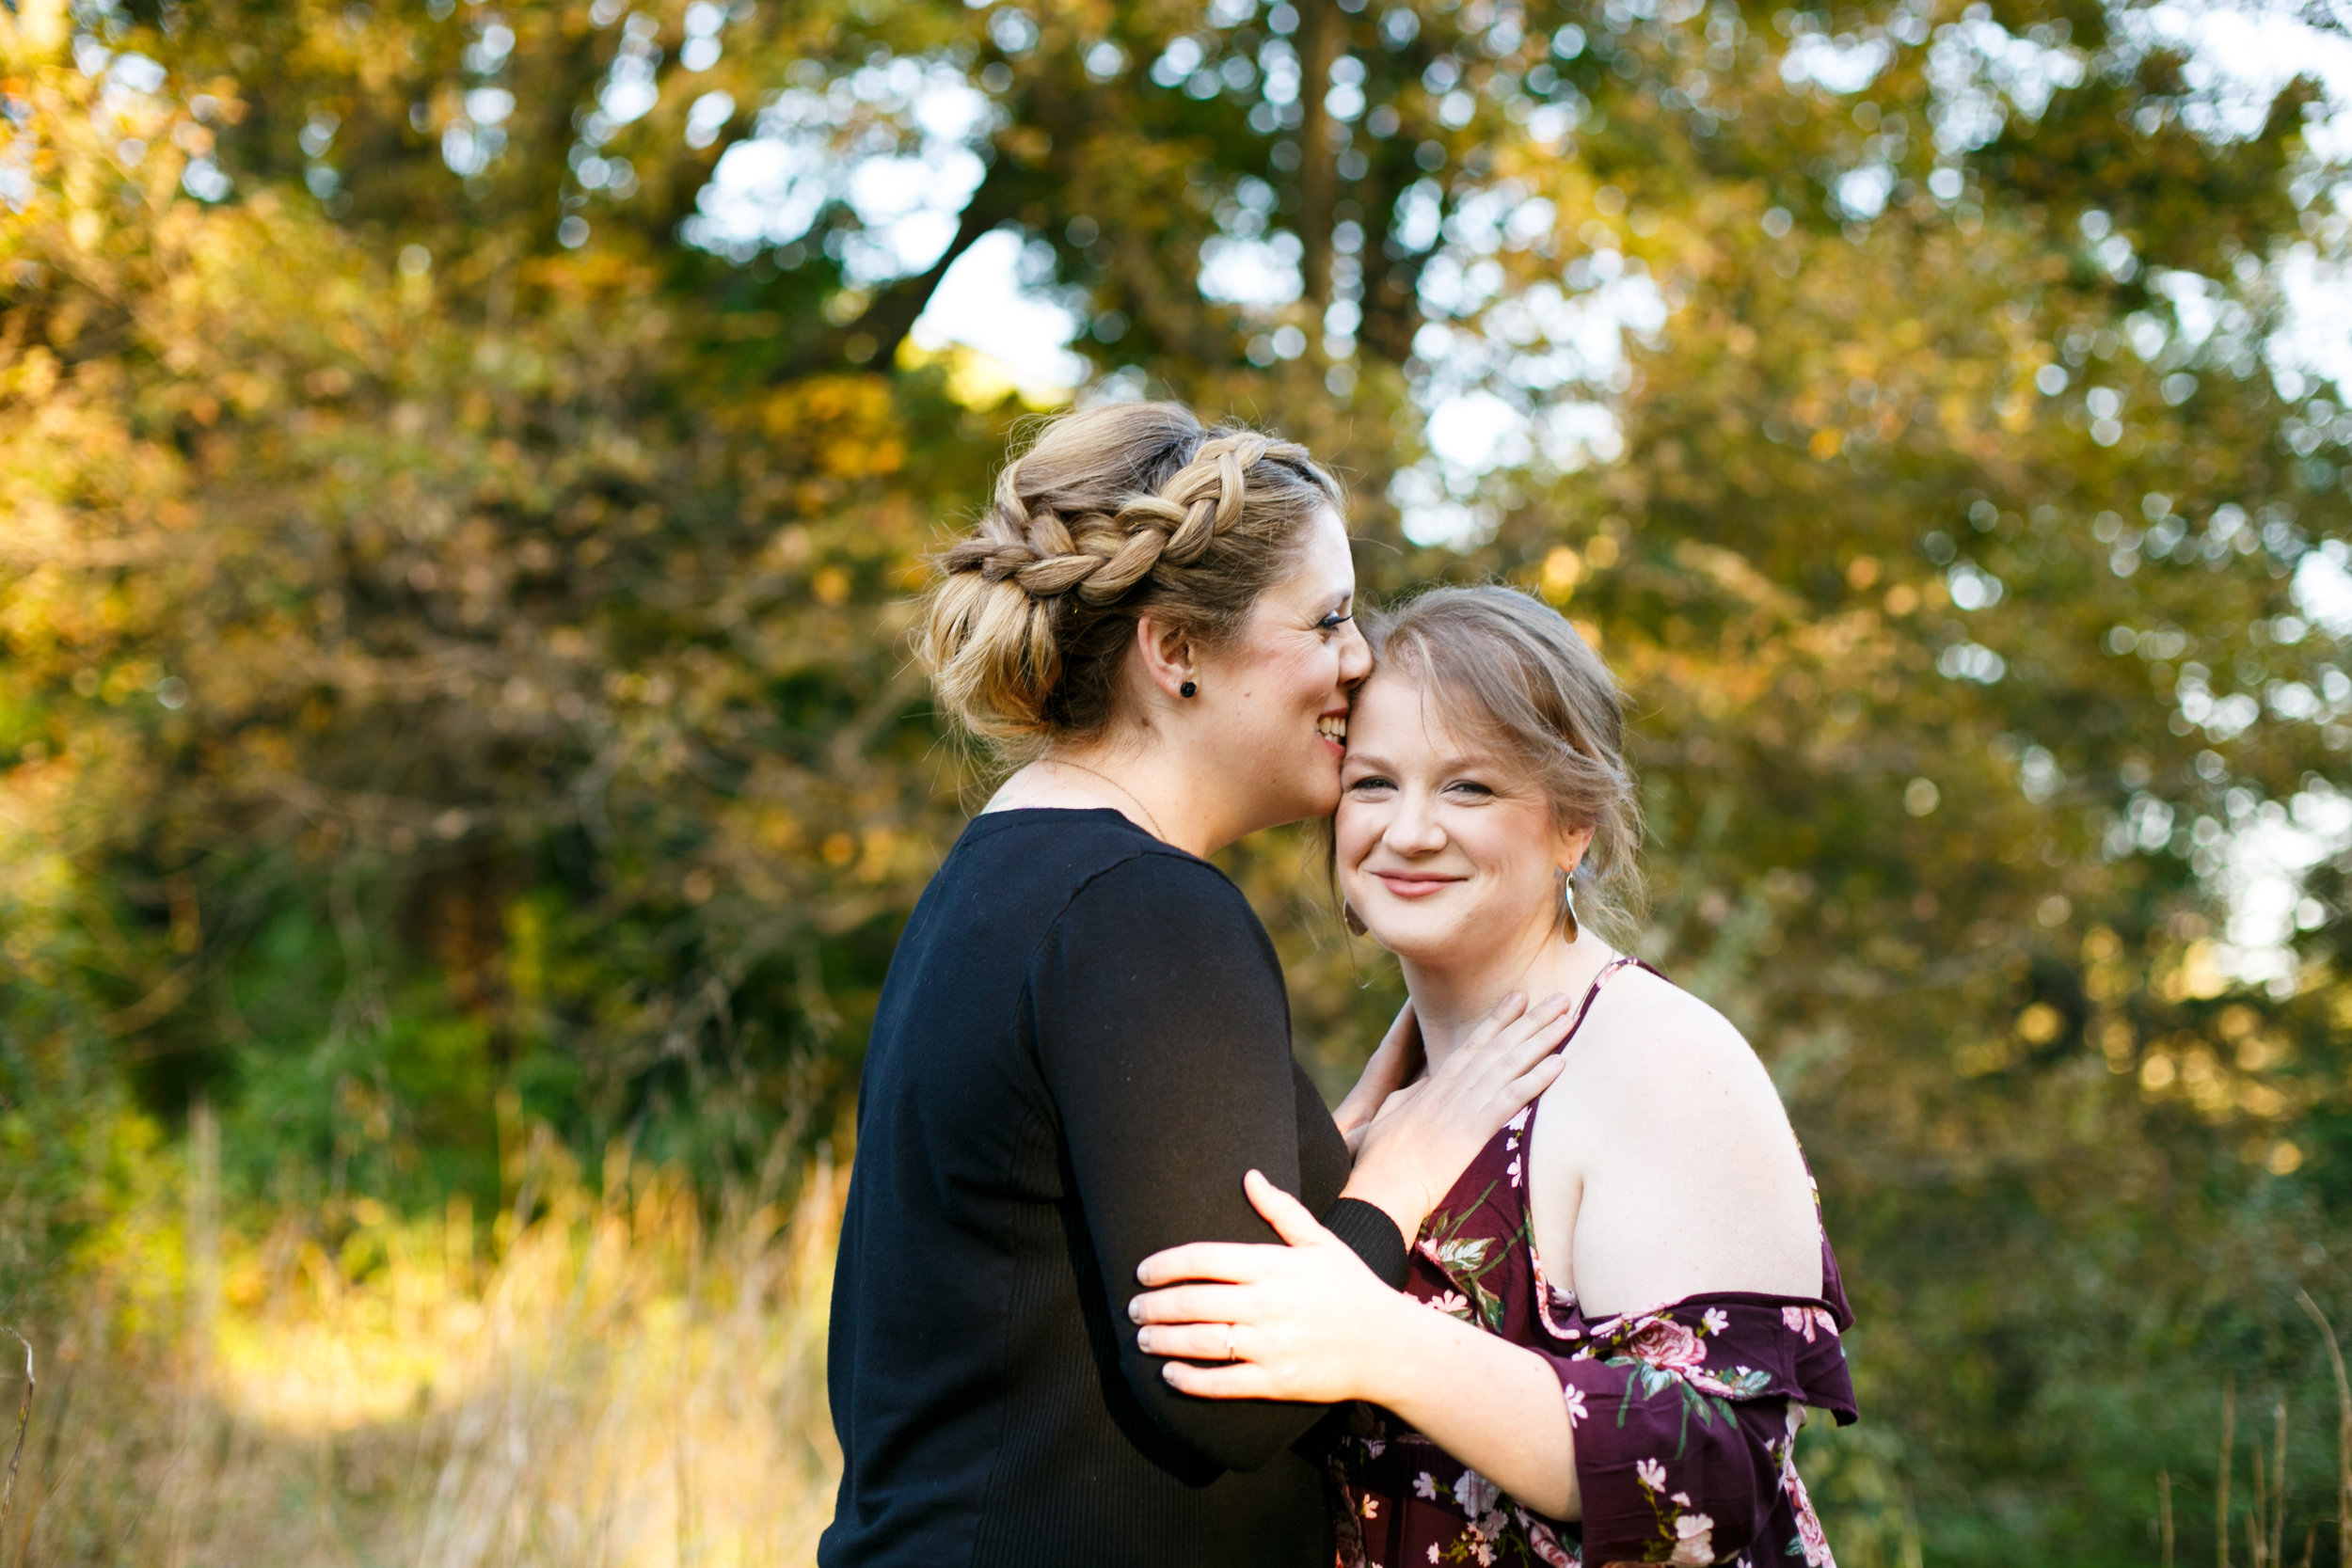 Ridley Creek State Park Engagement Session with LGBTQ Couple 16